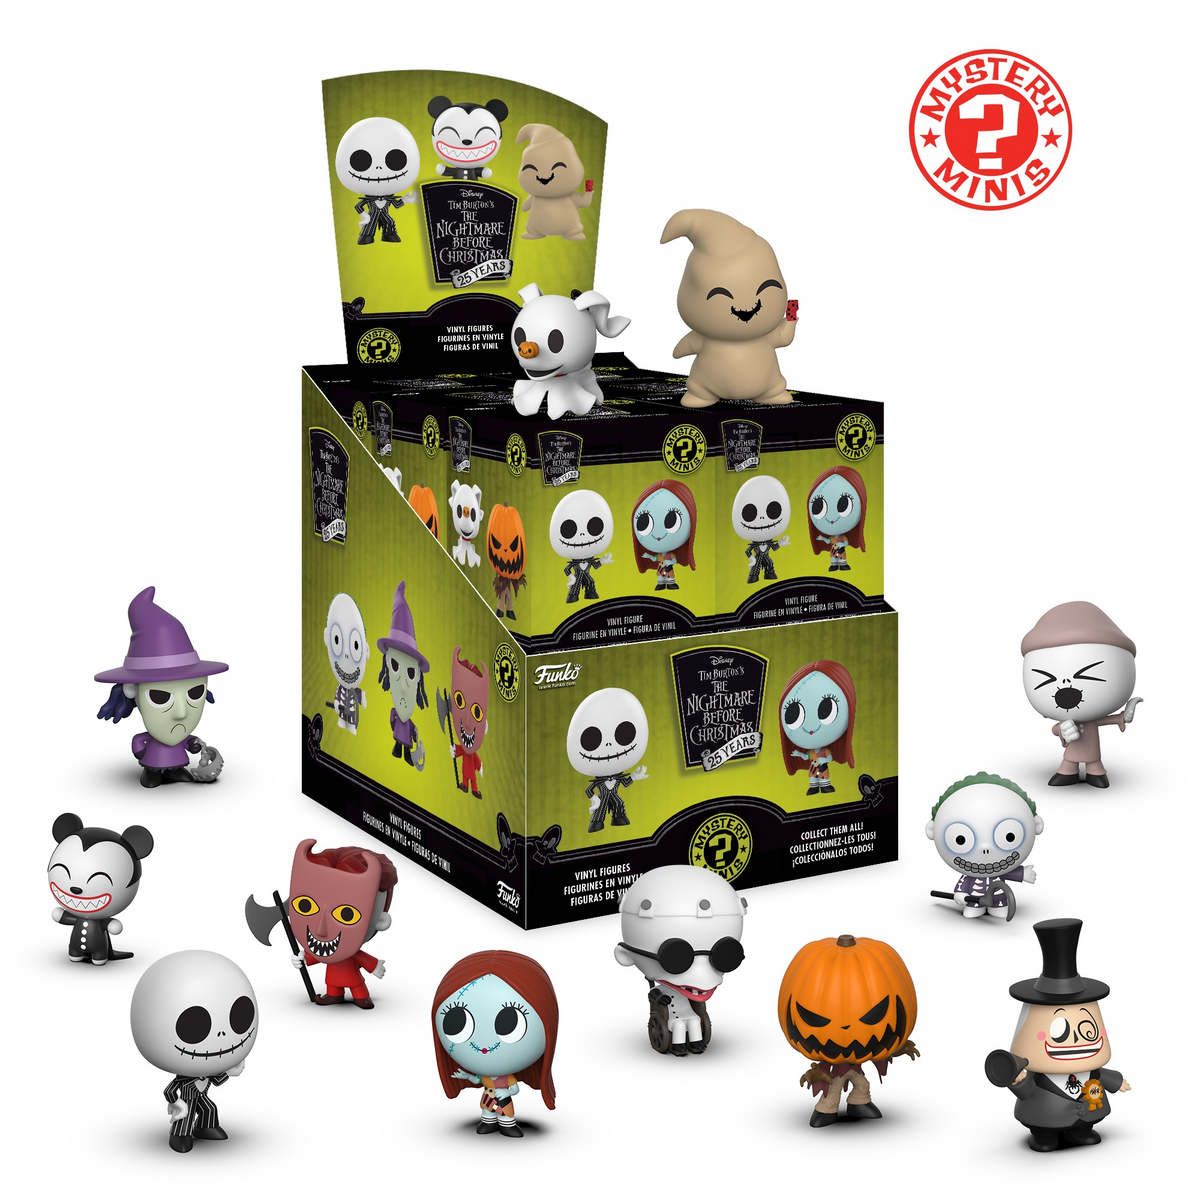 The Nightmare Before Christmas Disney Mystery Minis by Funko